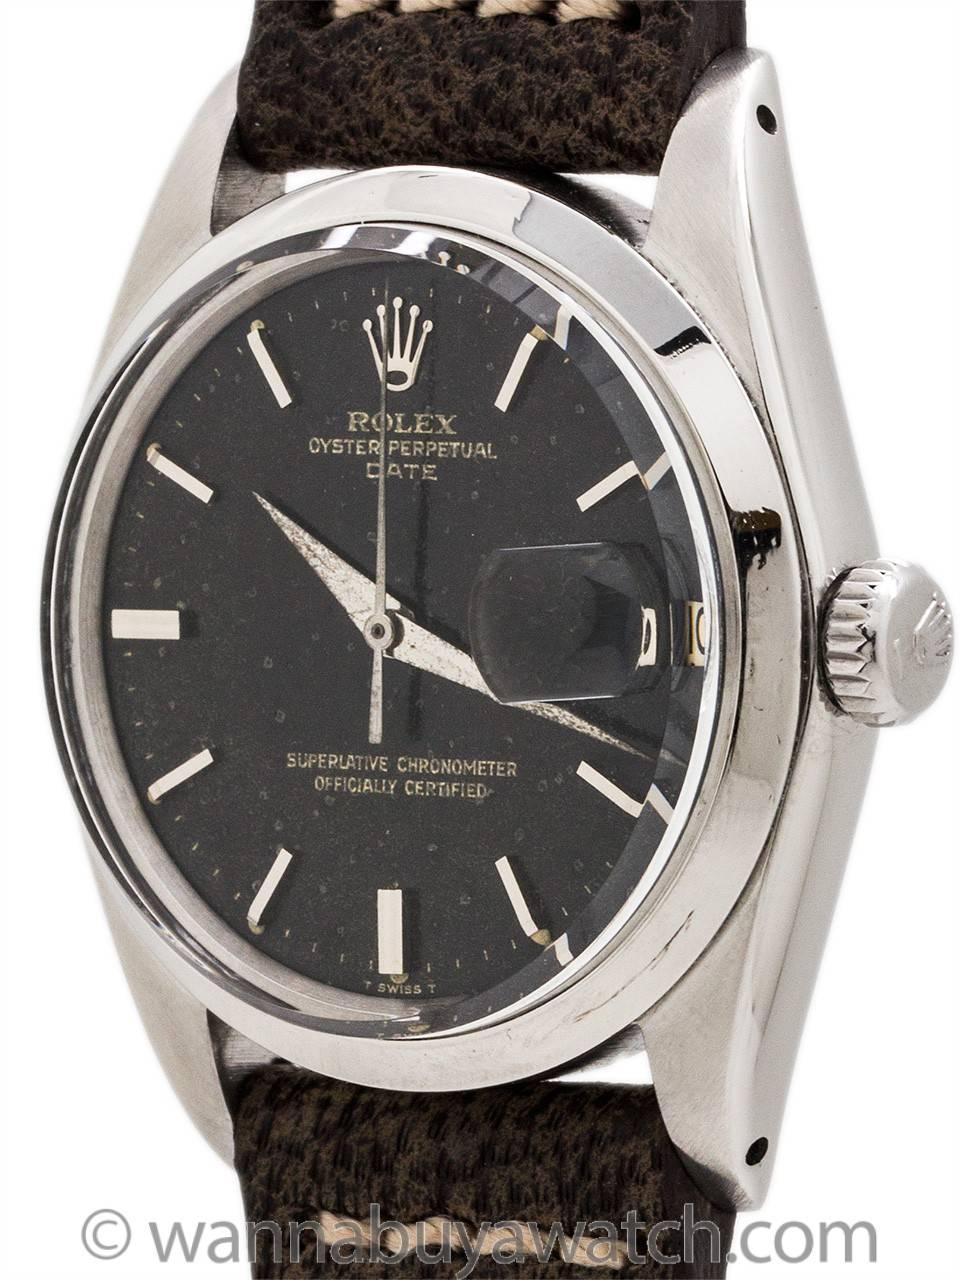 Man’s vintage Rolex stainless steel Oyster Perpetual Date ref 1500 serial # 1.1 million circa 1964 with original gloss black gilt dial. Featuring 34mm diameter case with smooth bezel and acrylic crystal and distinctive original gloss black dial with